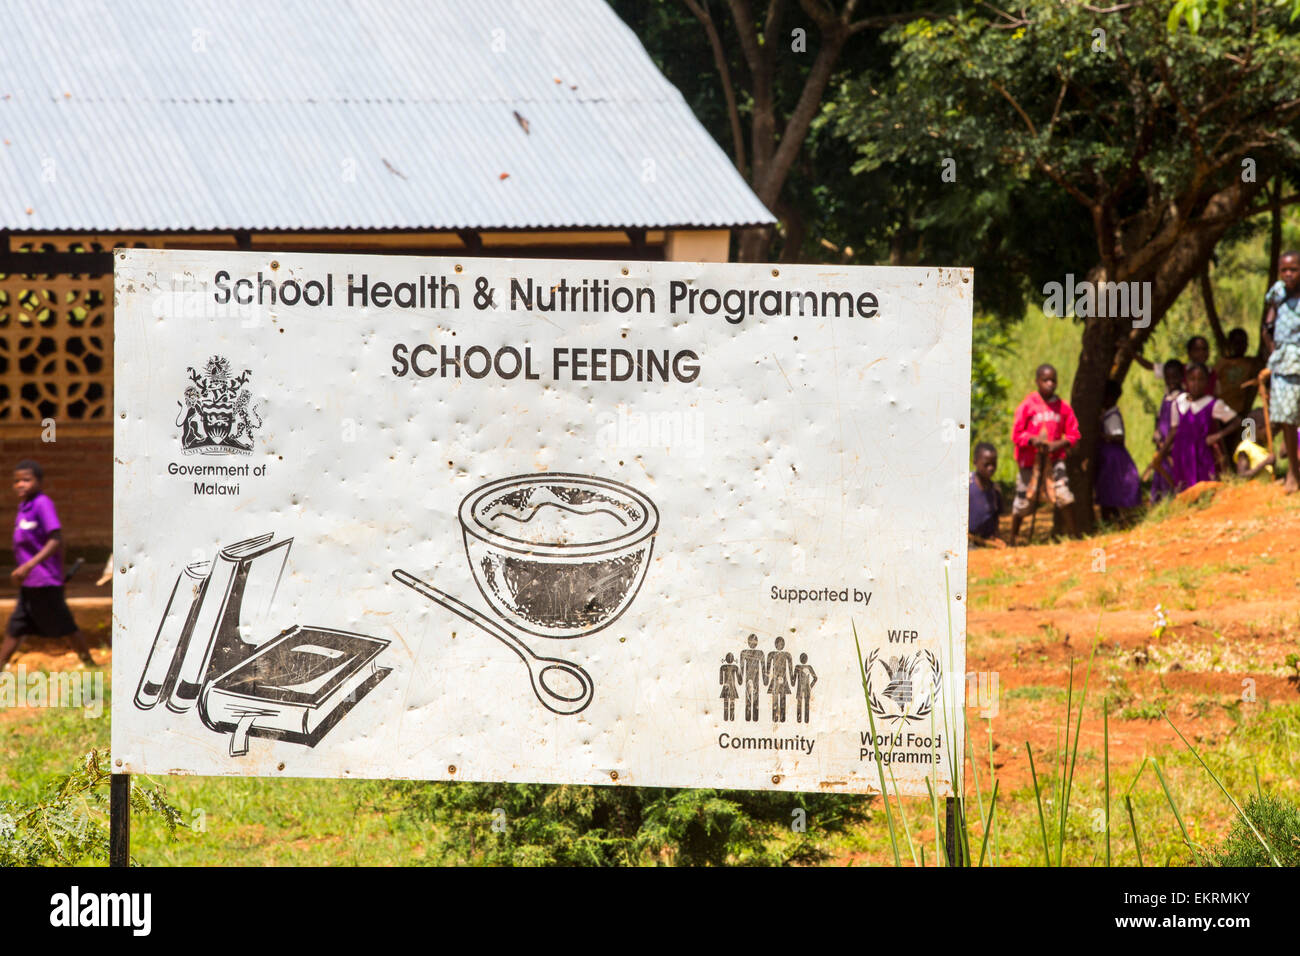 A school feeding program sign at a school on the Zomba Plateau, in a country where malnutrition is common, this World Food Program to provide additional food to infant school pupils is very important. Stock Photo